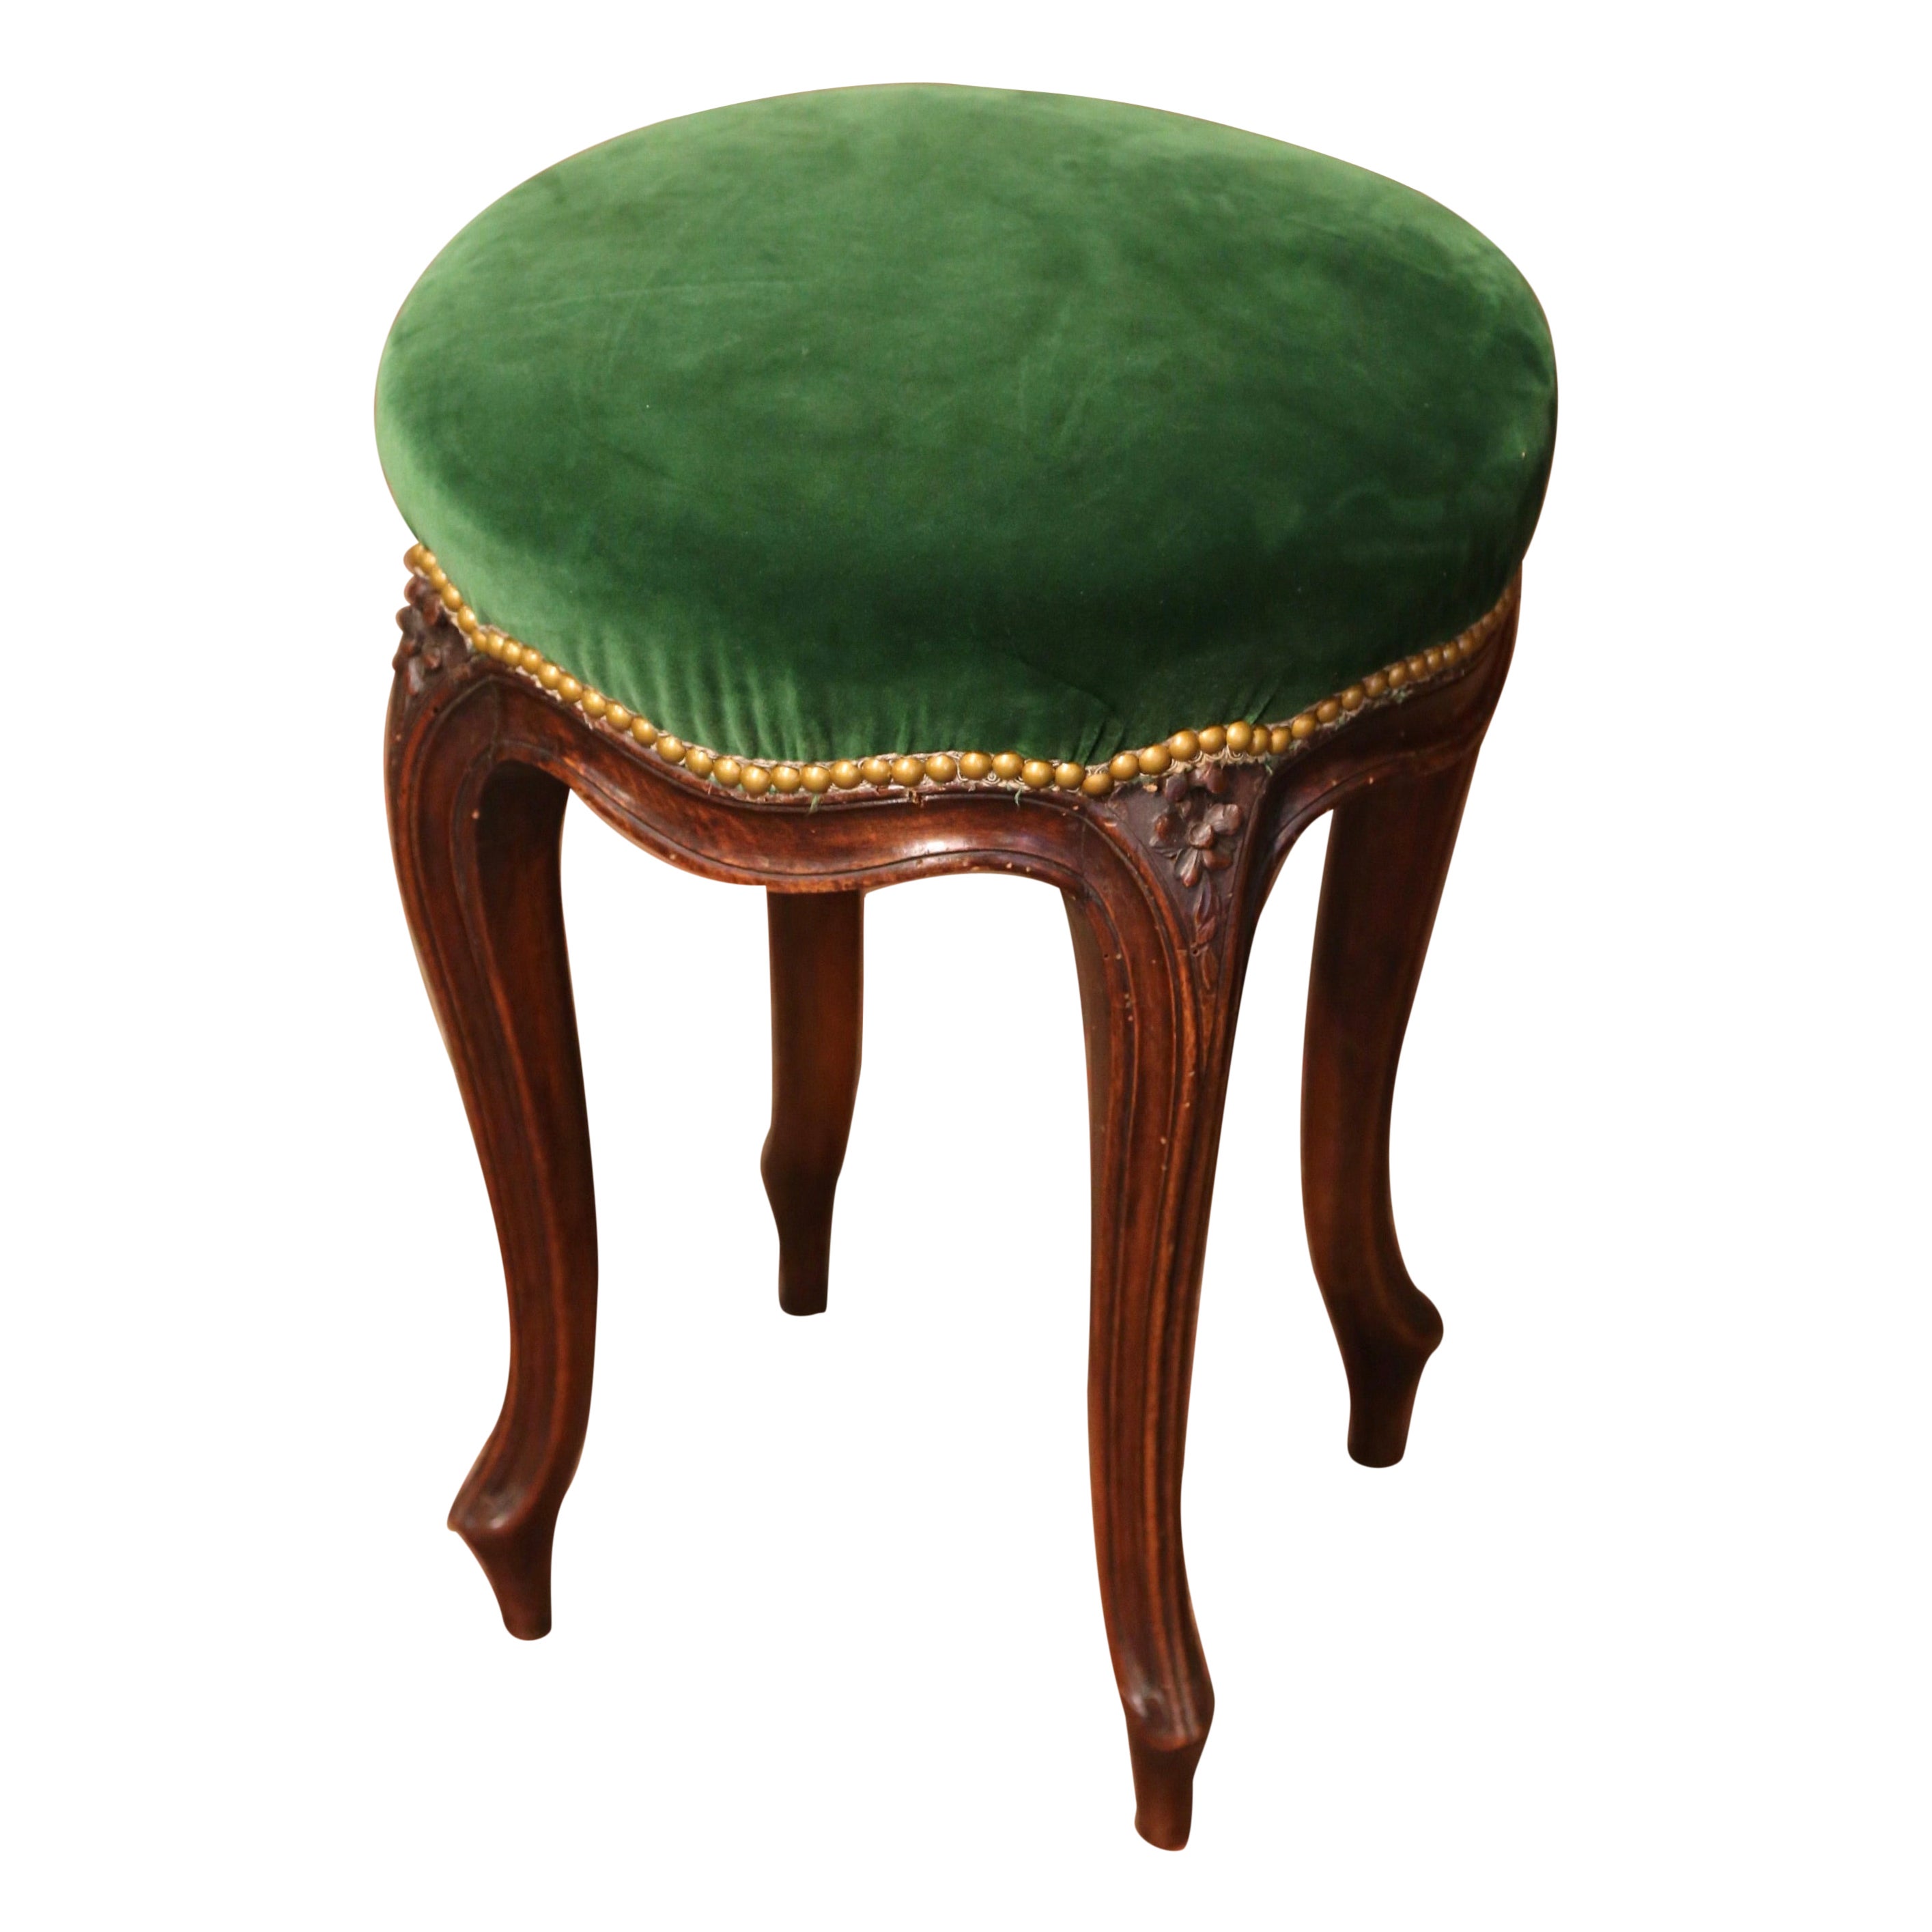 19th Century French Louis XV Carved Walnut Stool with Green Velvet